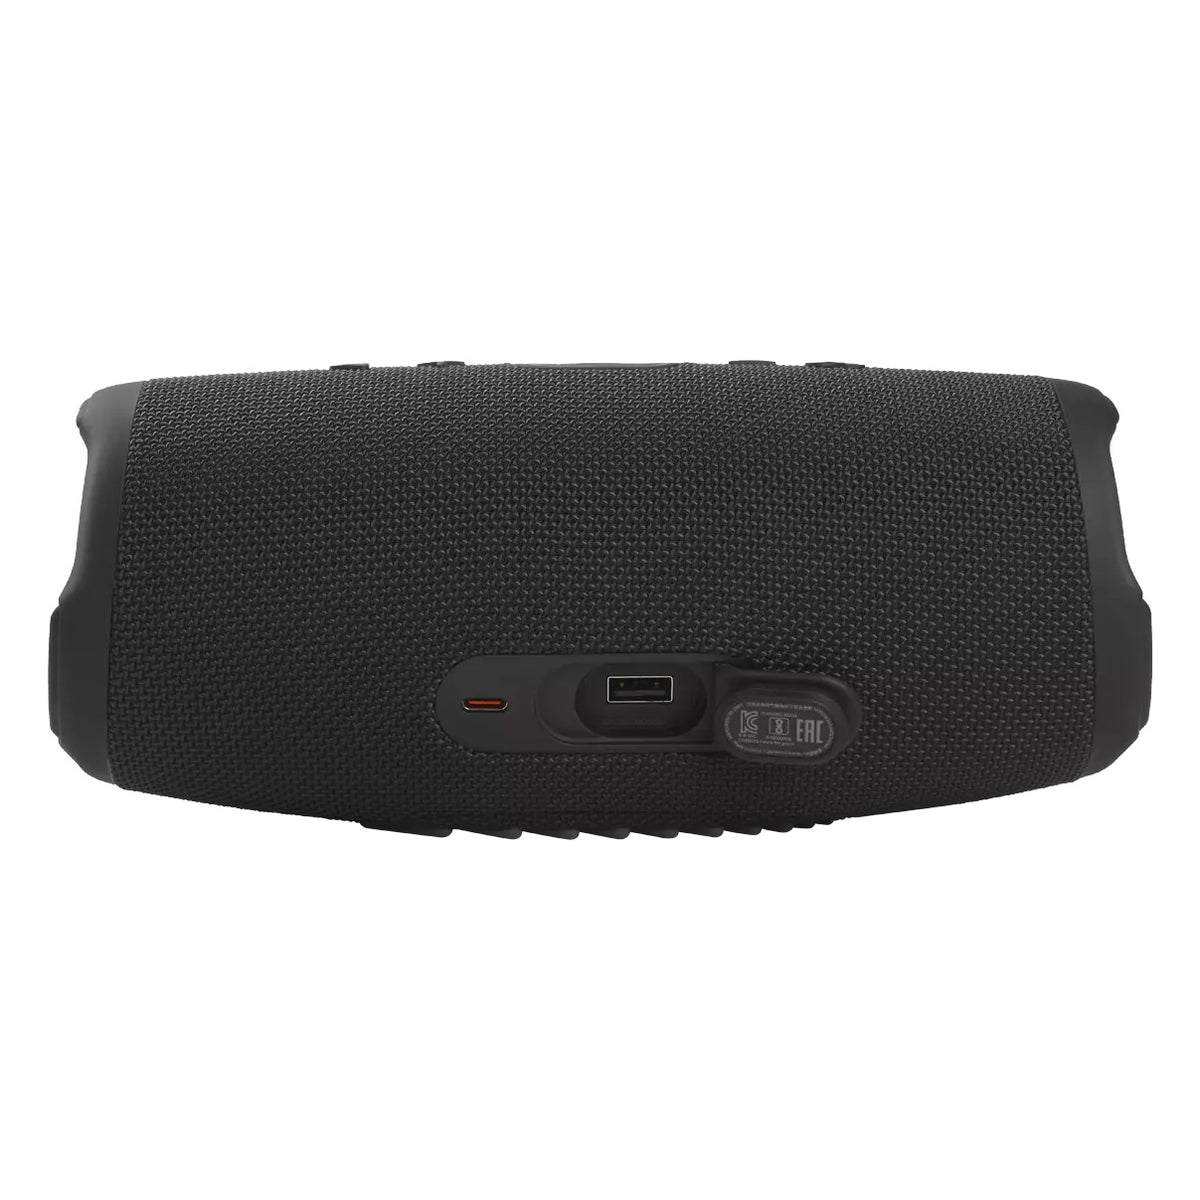 Bocina inalámbrica JBL Charge 5, IP67, Bluetooth, color negro - Multimax